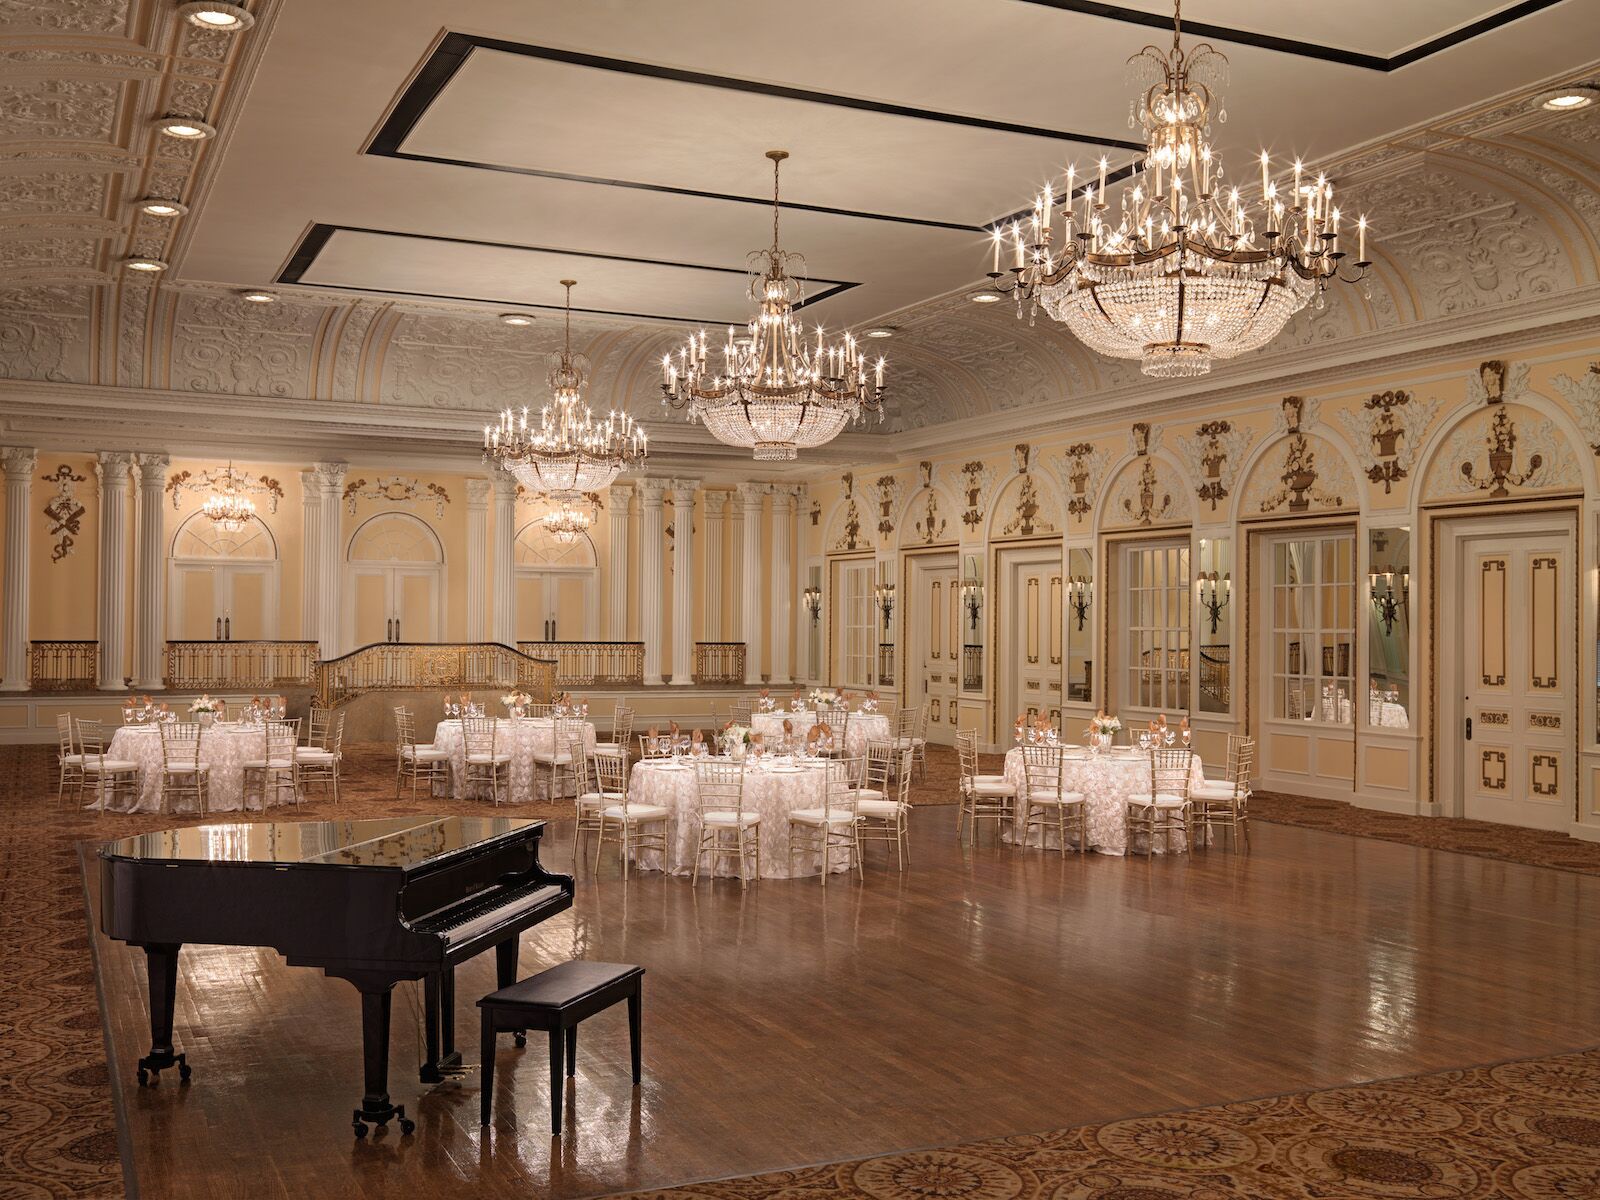 The ballroom is one ofthe rooms you'll see on a tour of the Peabody hotel